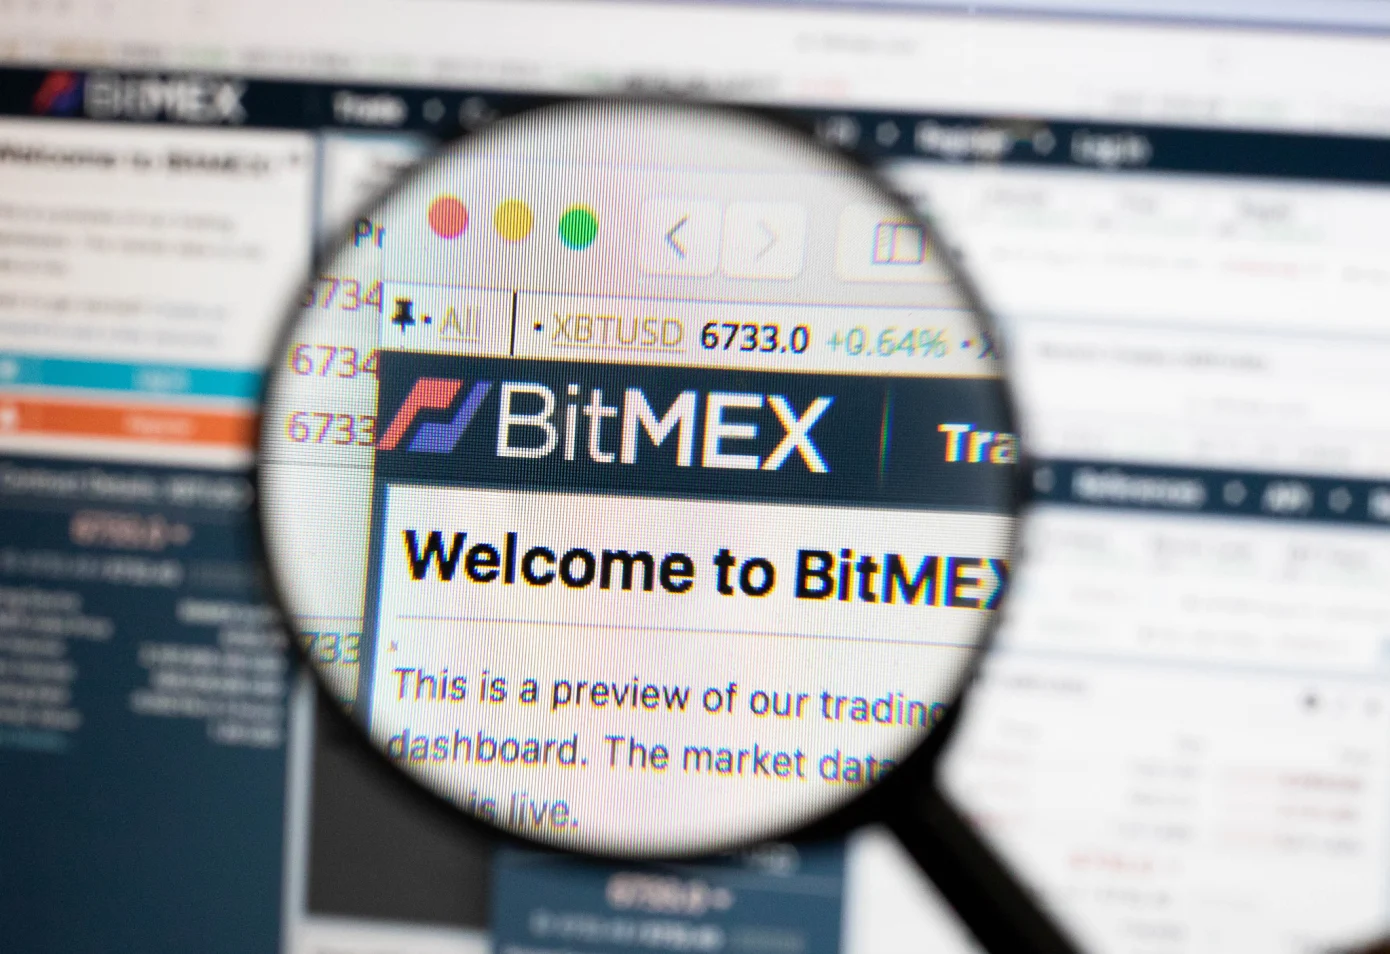 BitMEX crypto exchange lays off a quarter of staff after failed acquisition